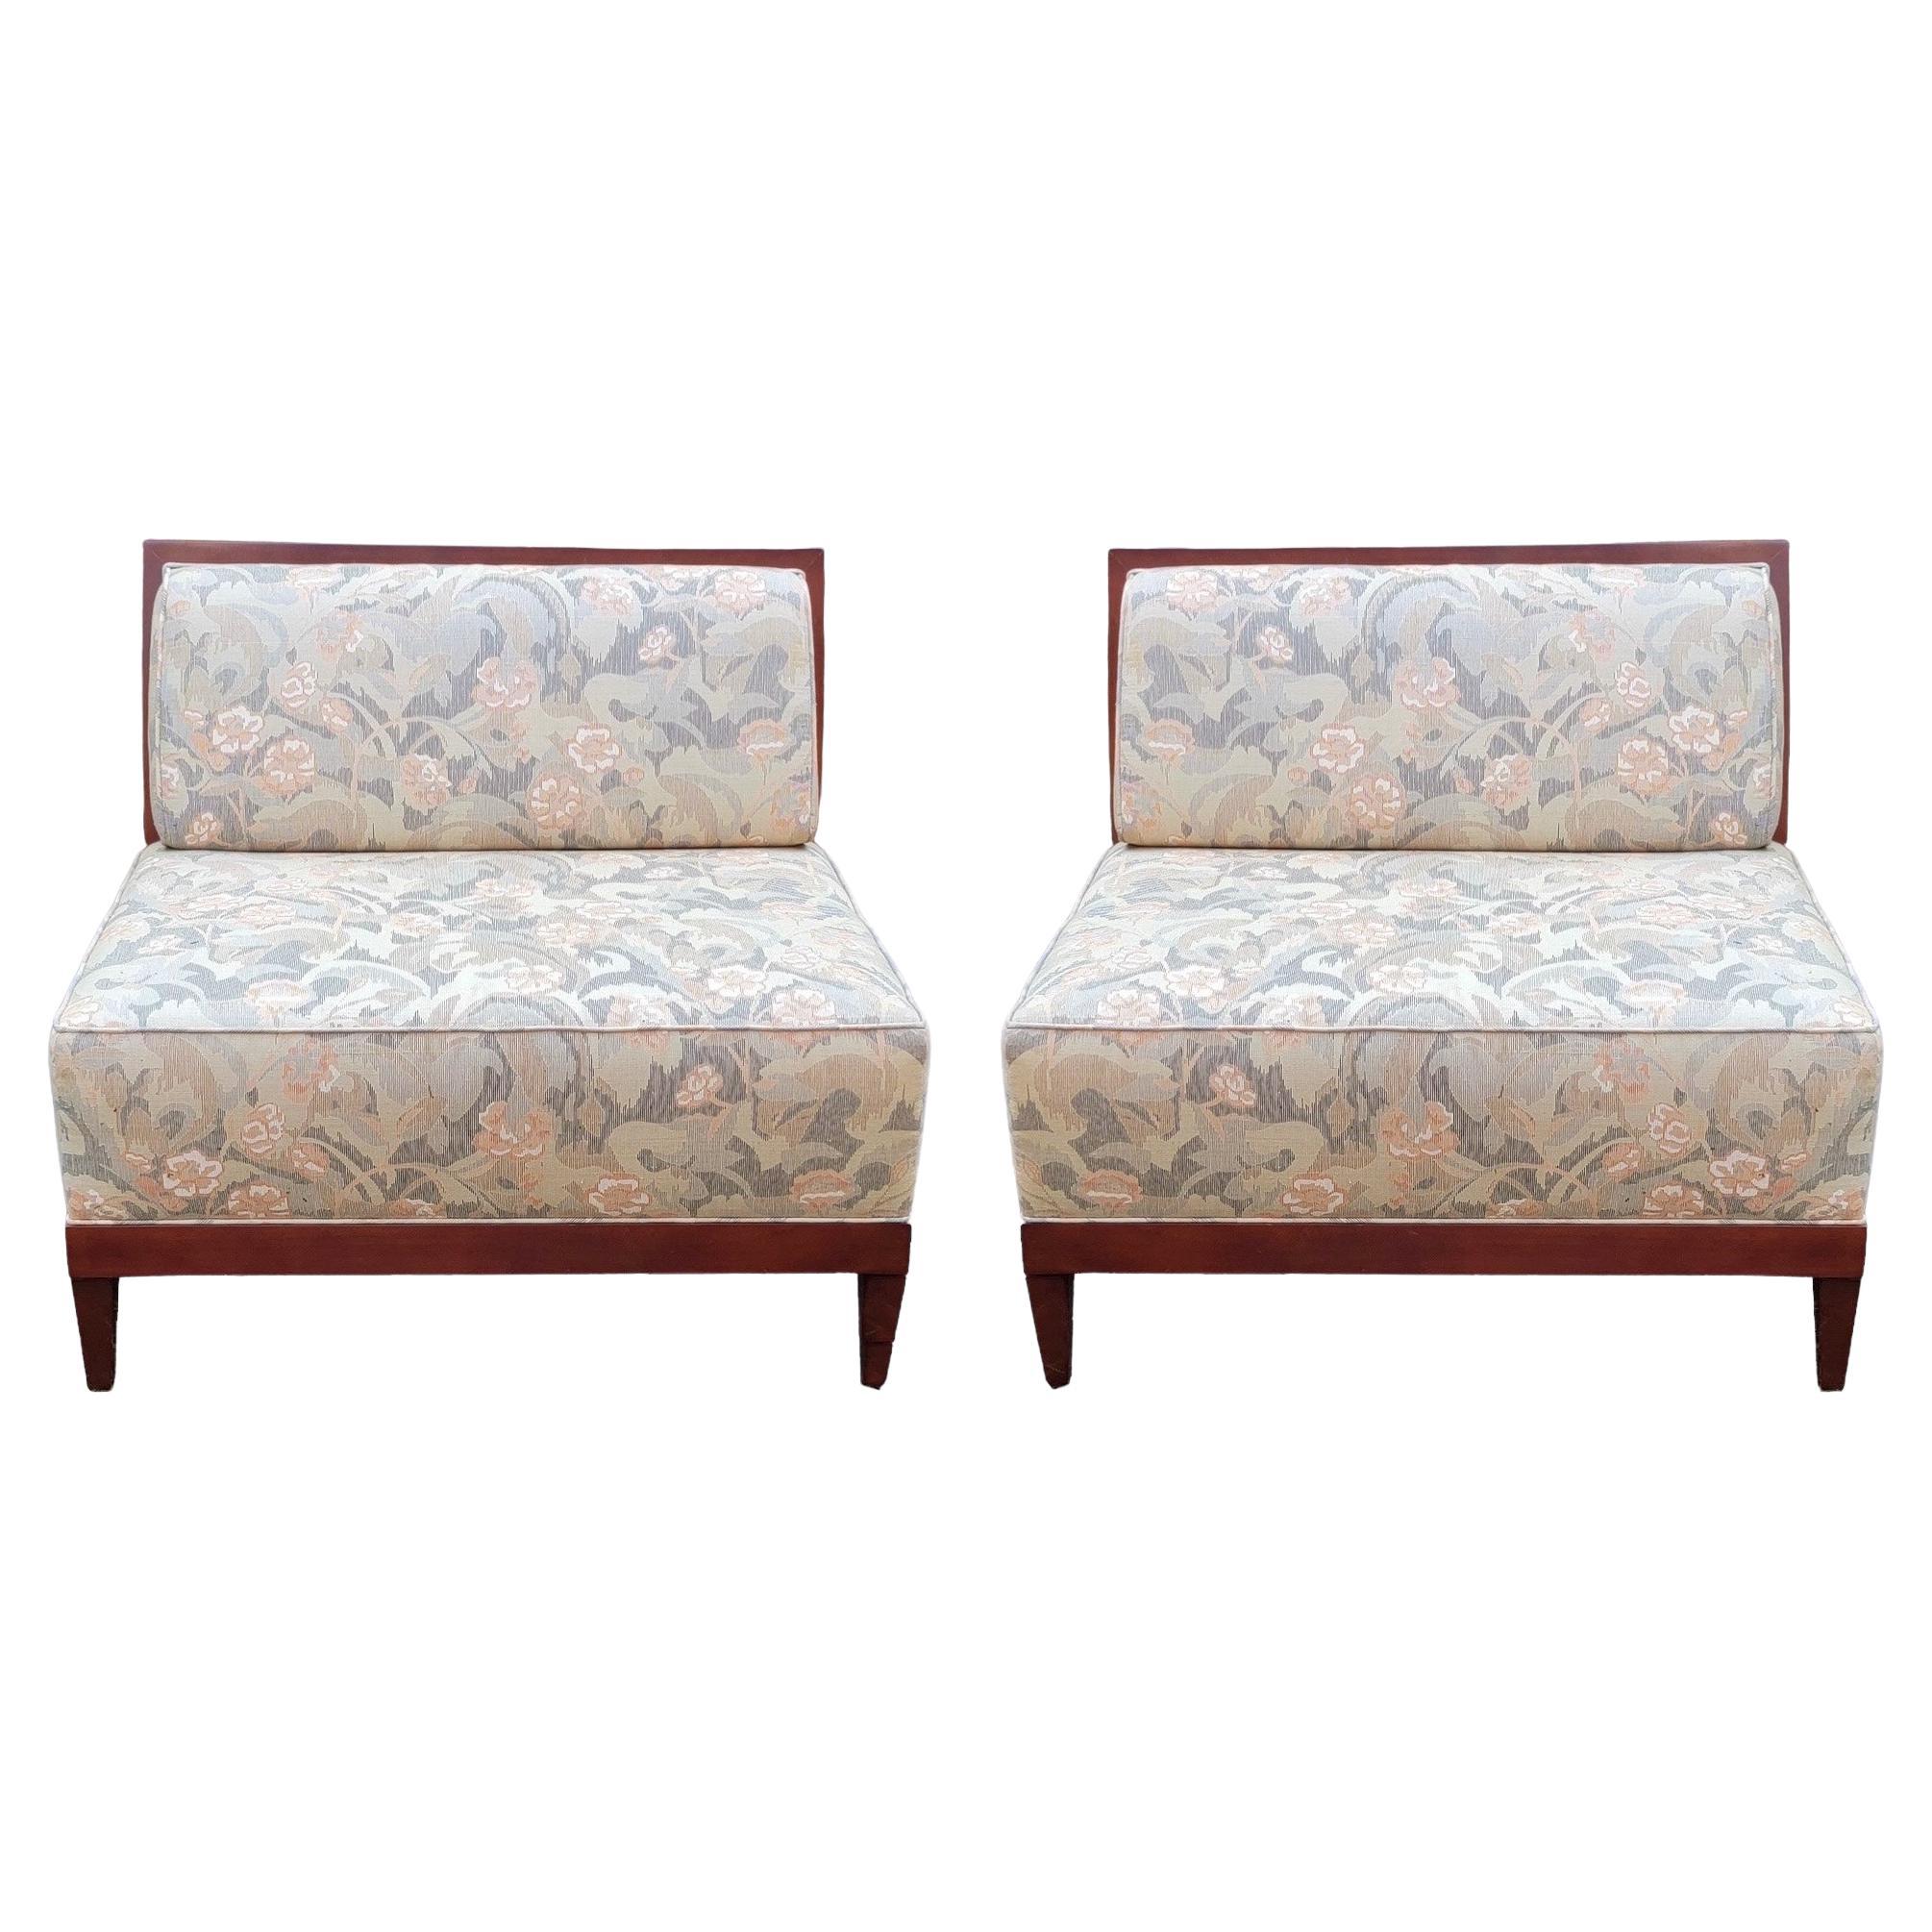 Modern Art Deco Style Mahogany Settees  / Large Chair By Baker Furniture - Pair For Sale